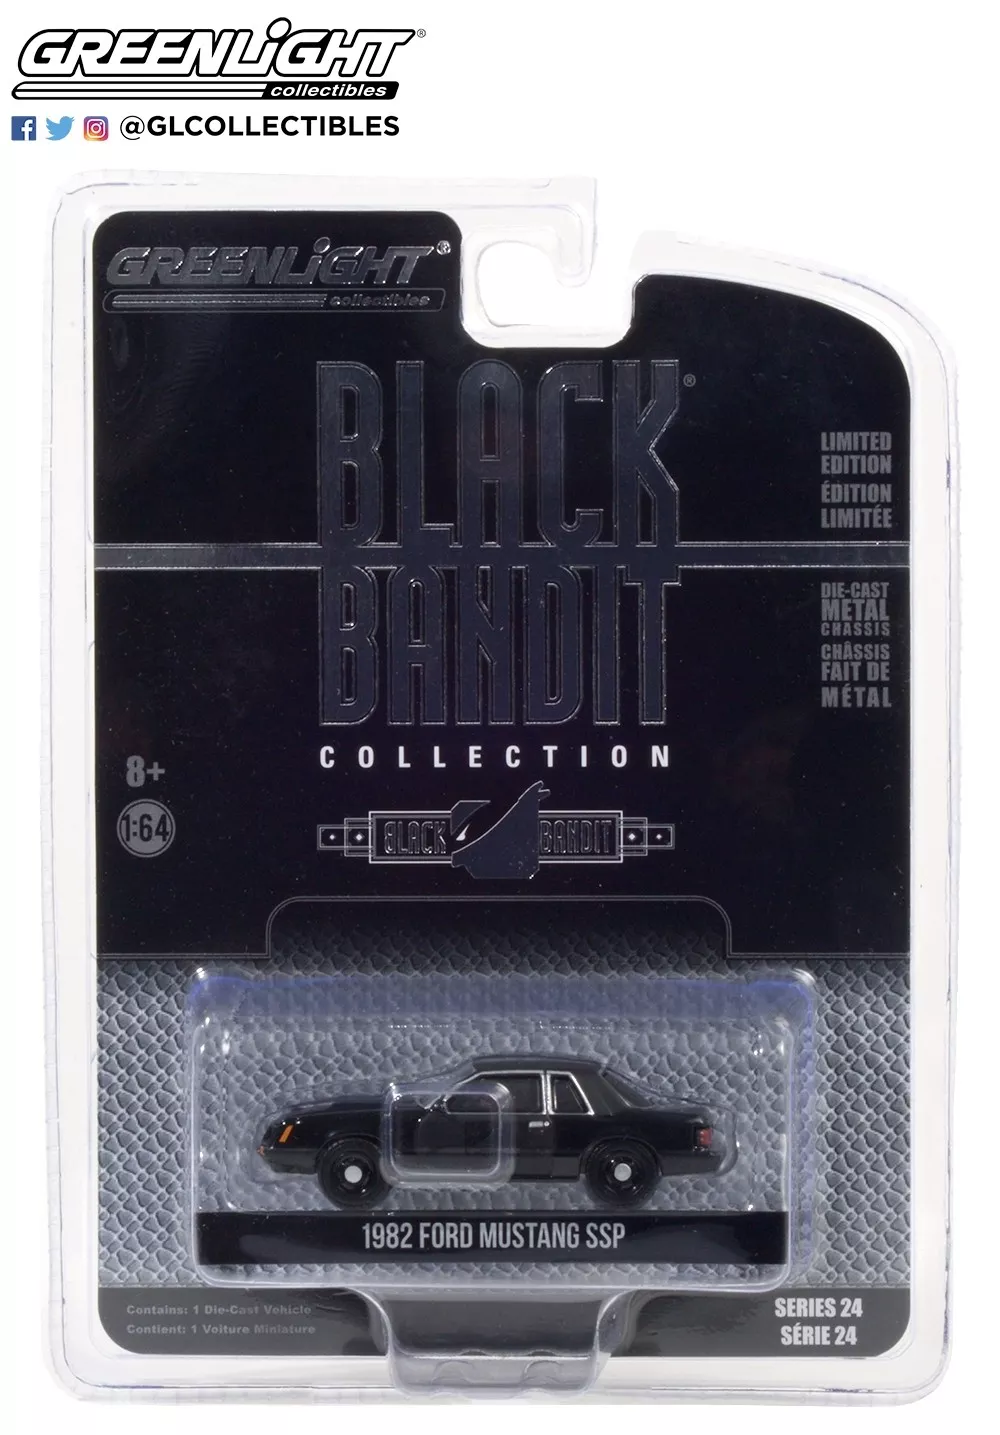 Greenlight - 1982 Ford Must ang SSP  - Black  Bandit  P olice